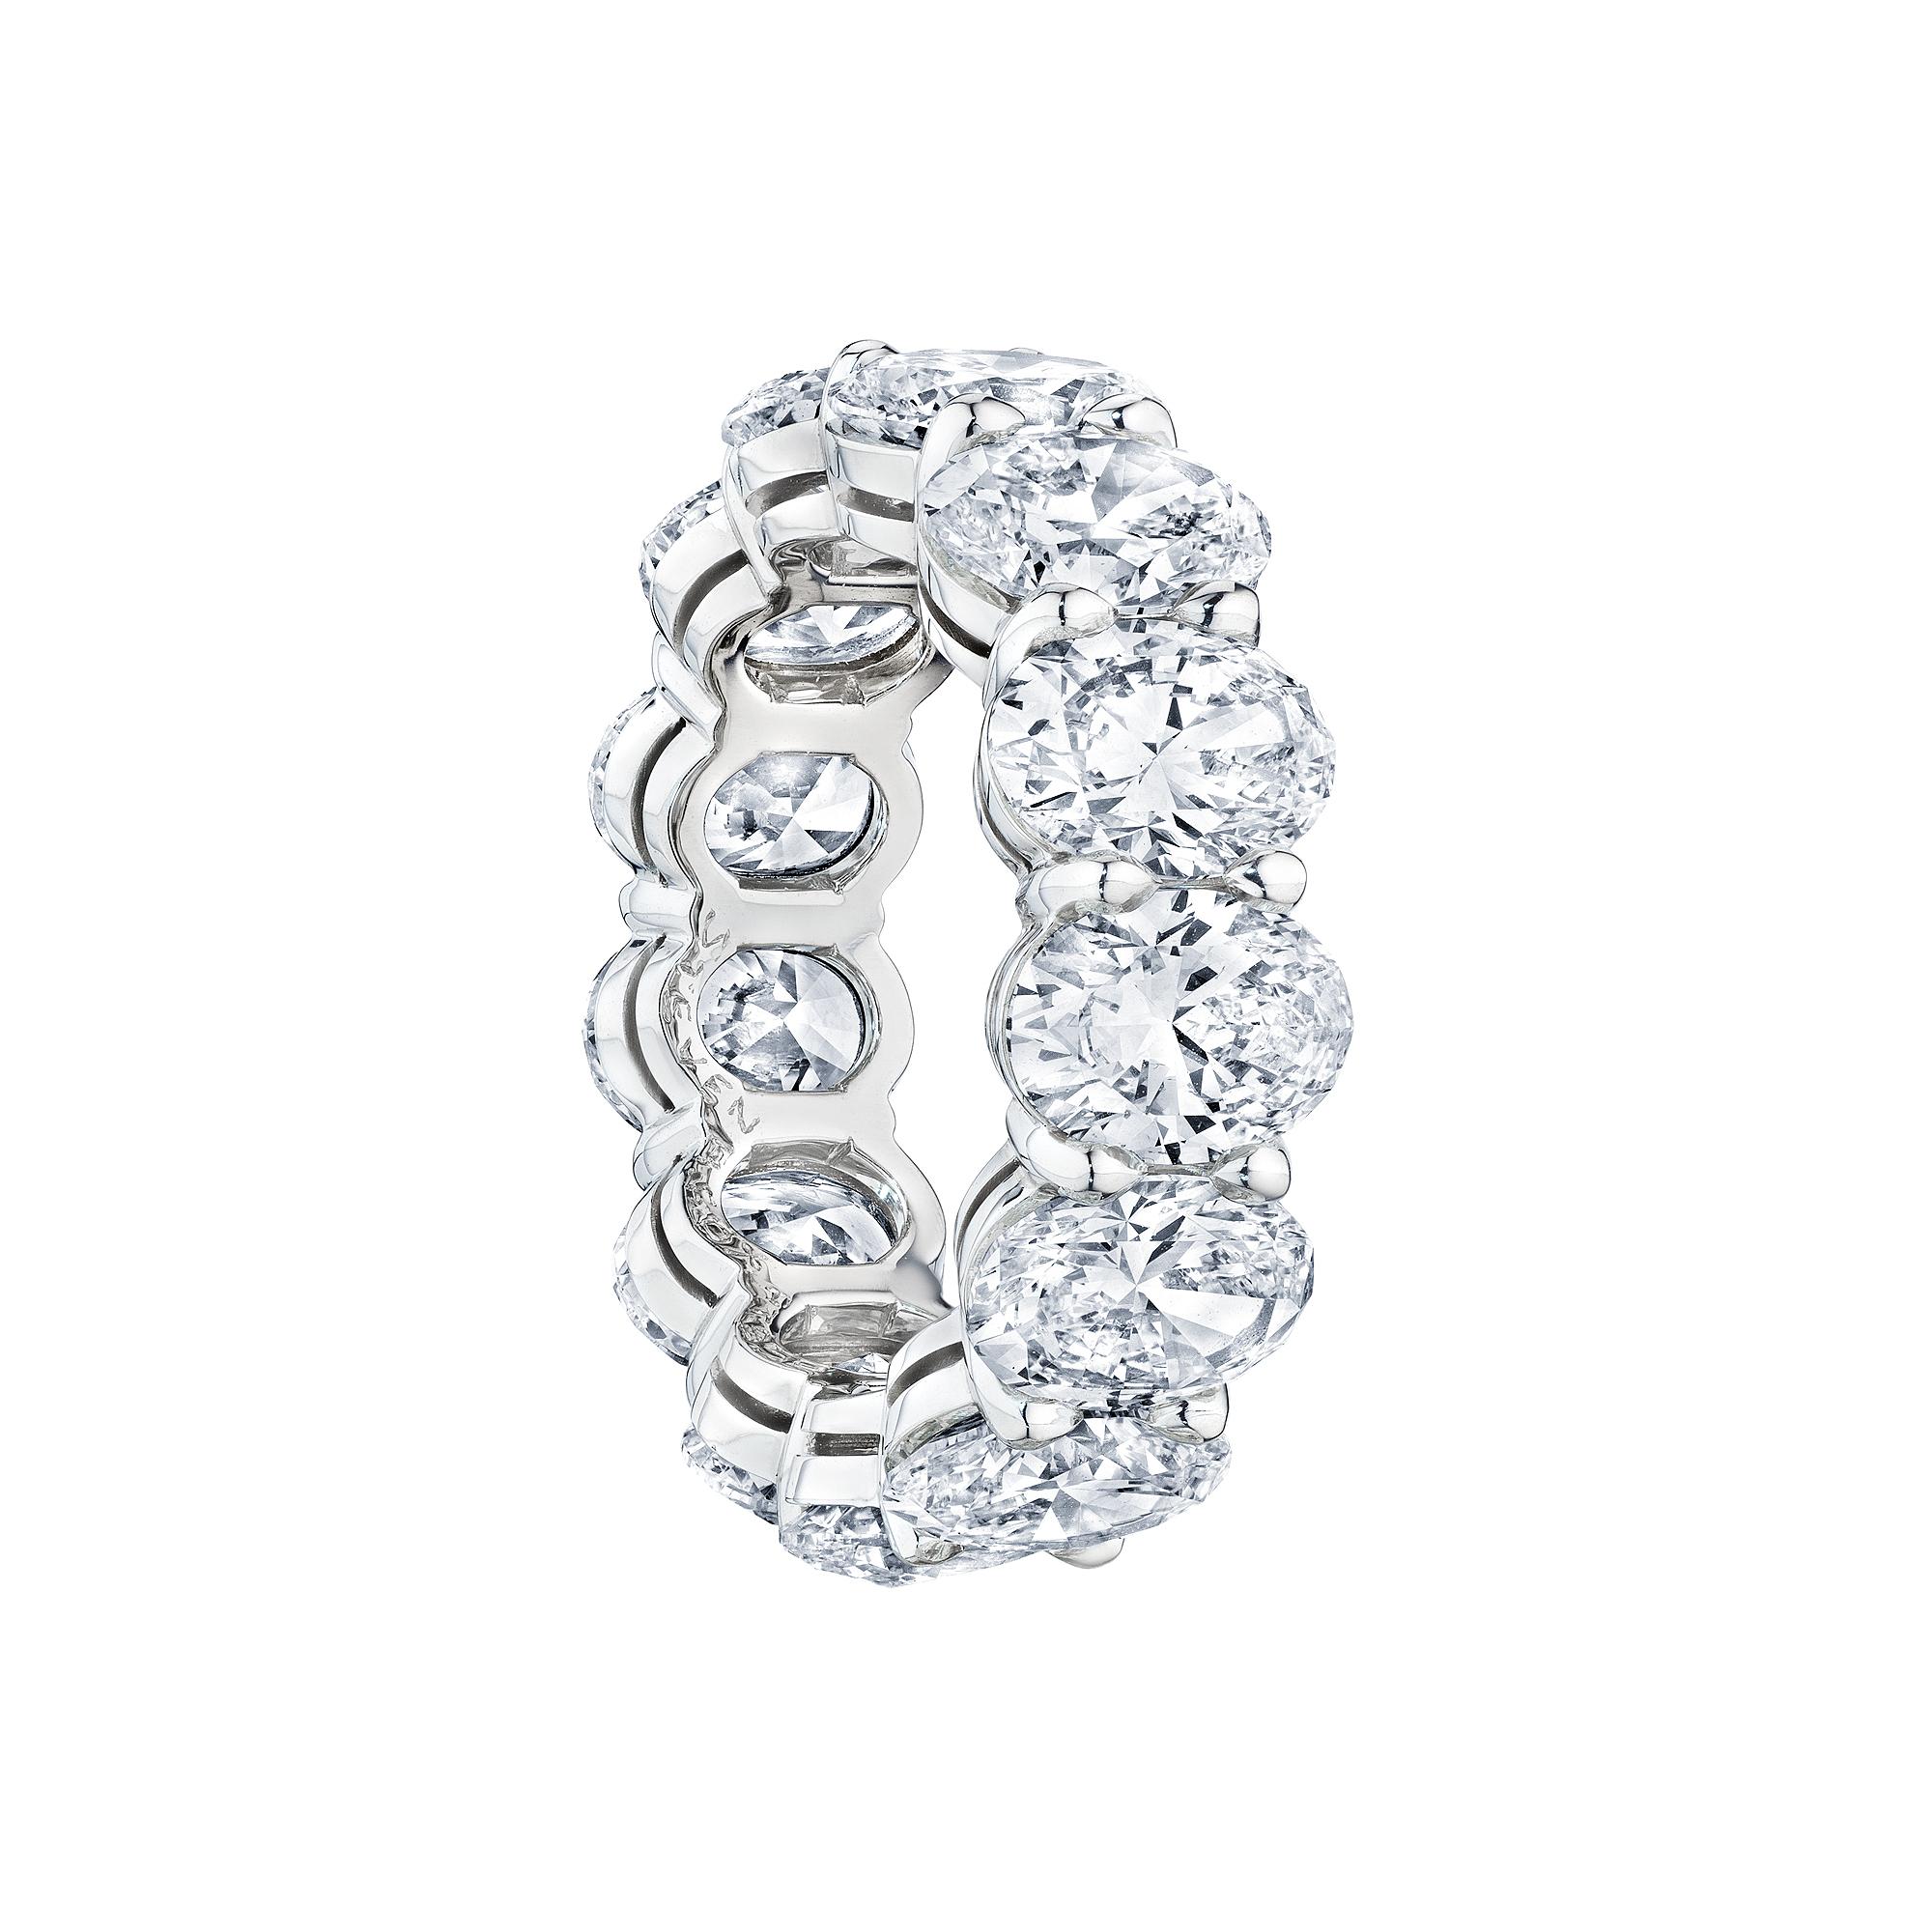 Oval bodied.  With 13 incredible matching oval brilliant cut diamonds elegantly standing side by side, this one-of-a-kind diamond and platinum eternity band has visual strength and a timeless spirit.  Total diamond weight is 9.55 carats.  D-F color.